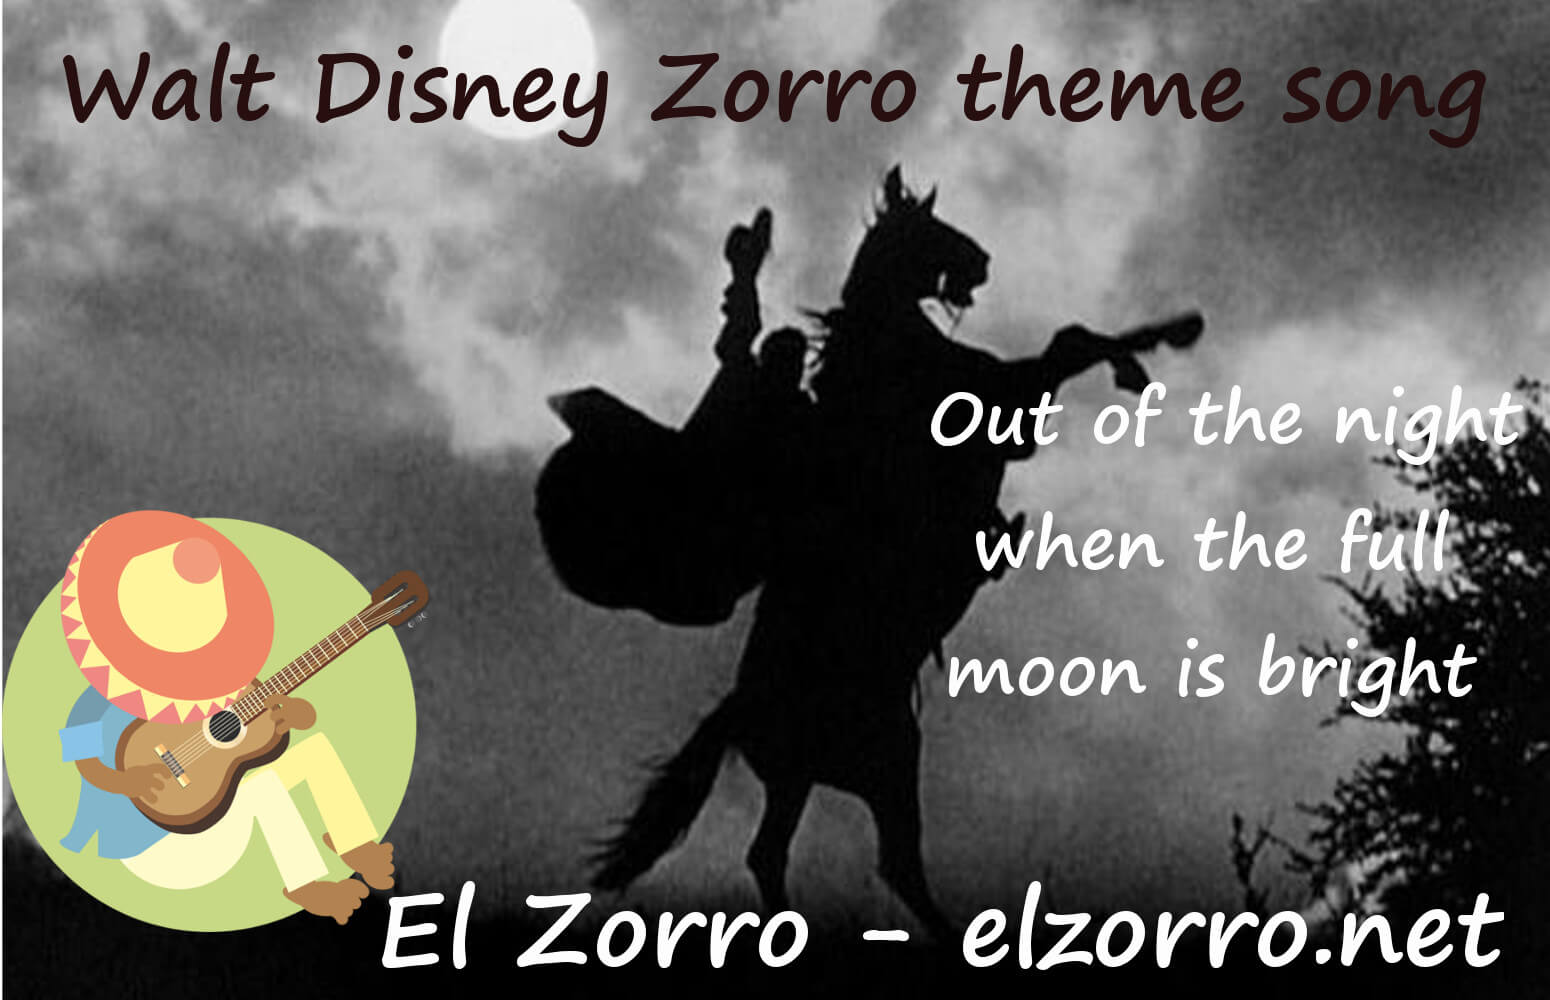 Walt Disney Zorro theme song Out of the night when the full moon is bright